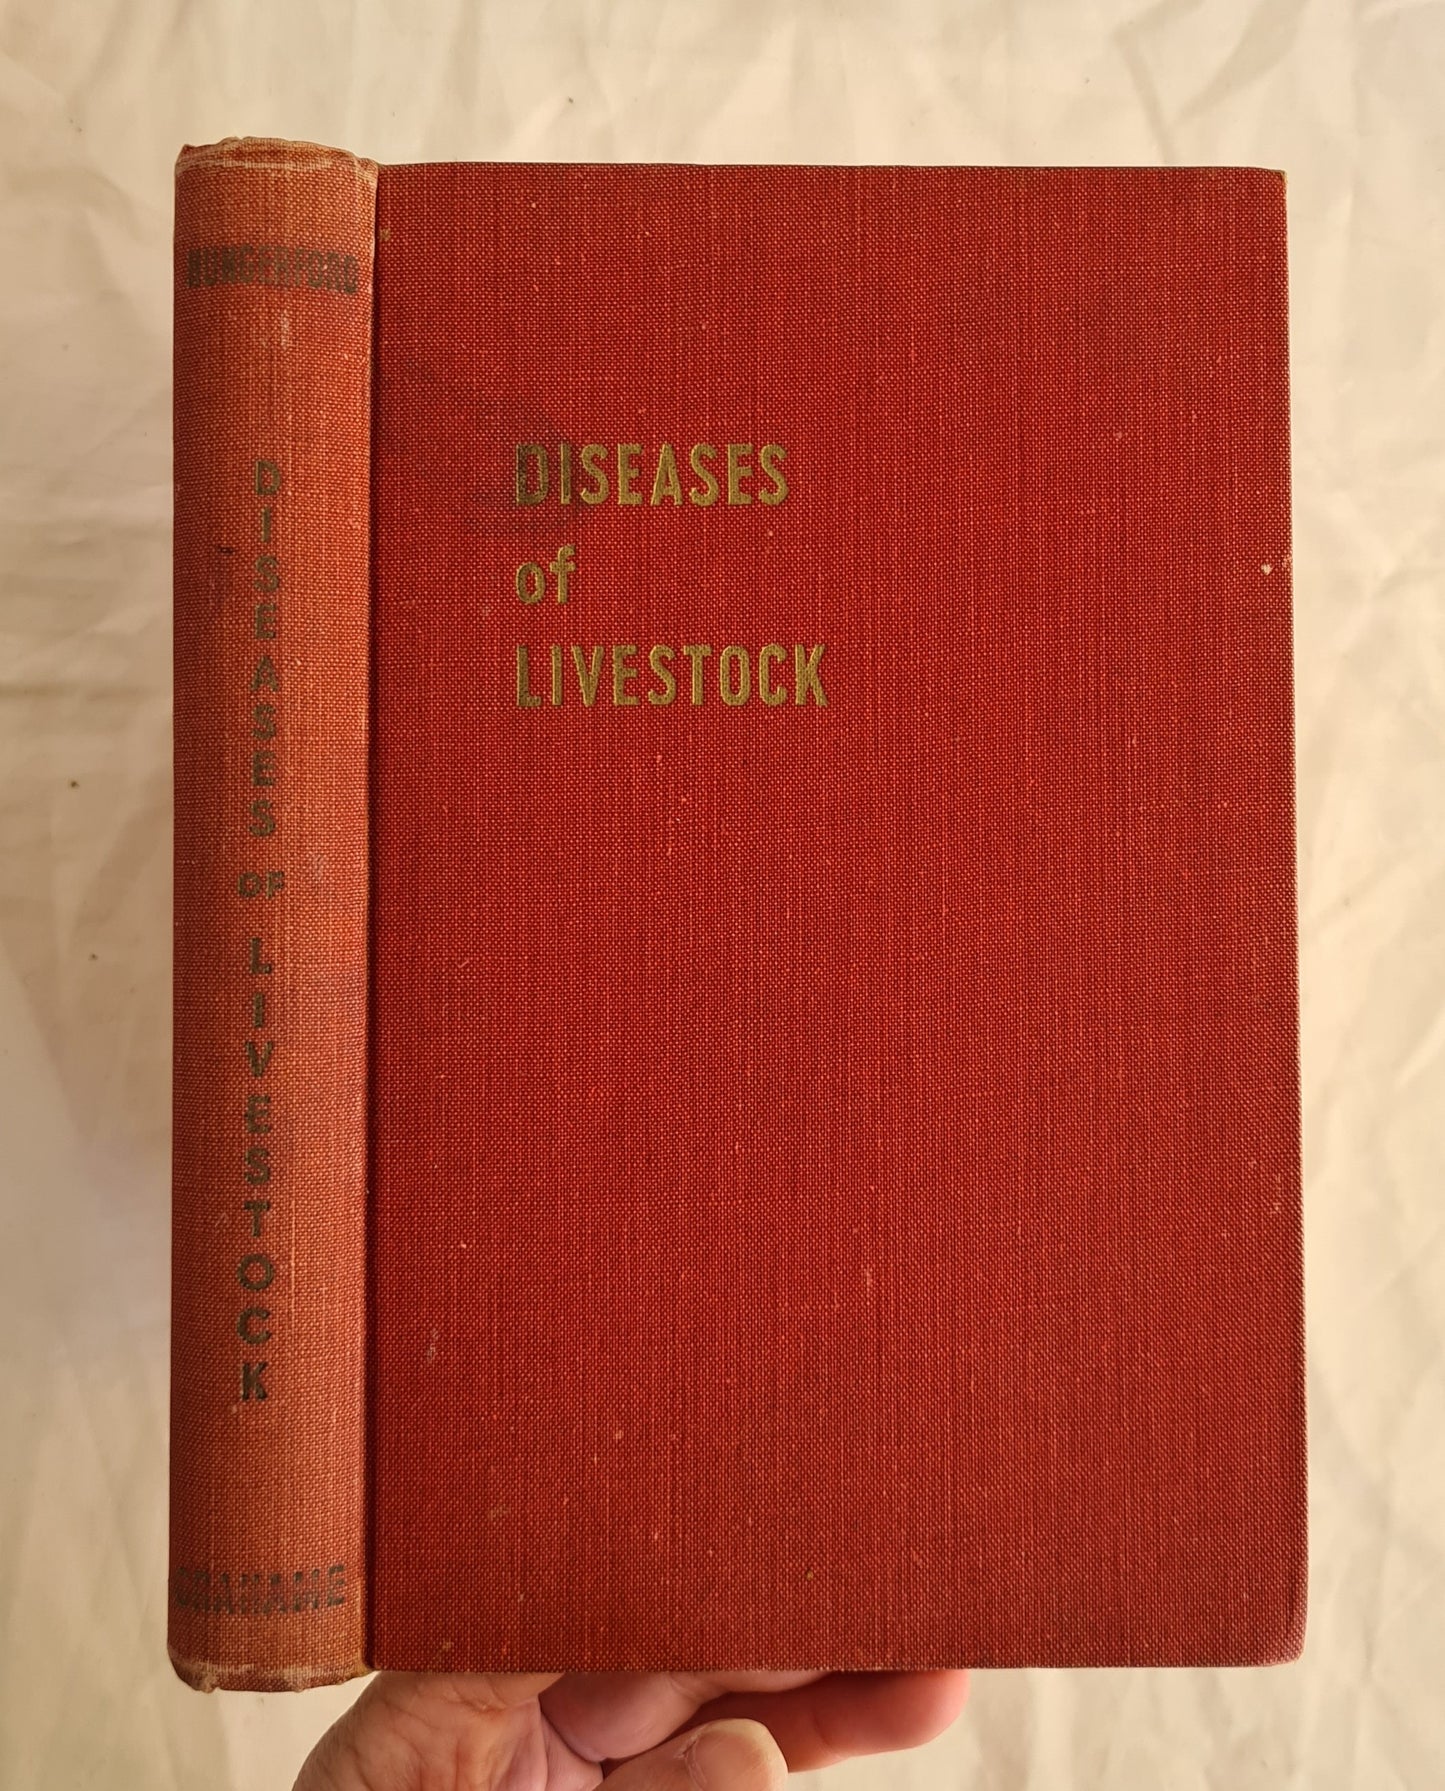 Diseases of Livestock  by T. G. Hungerford